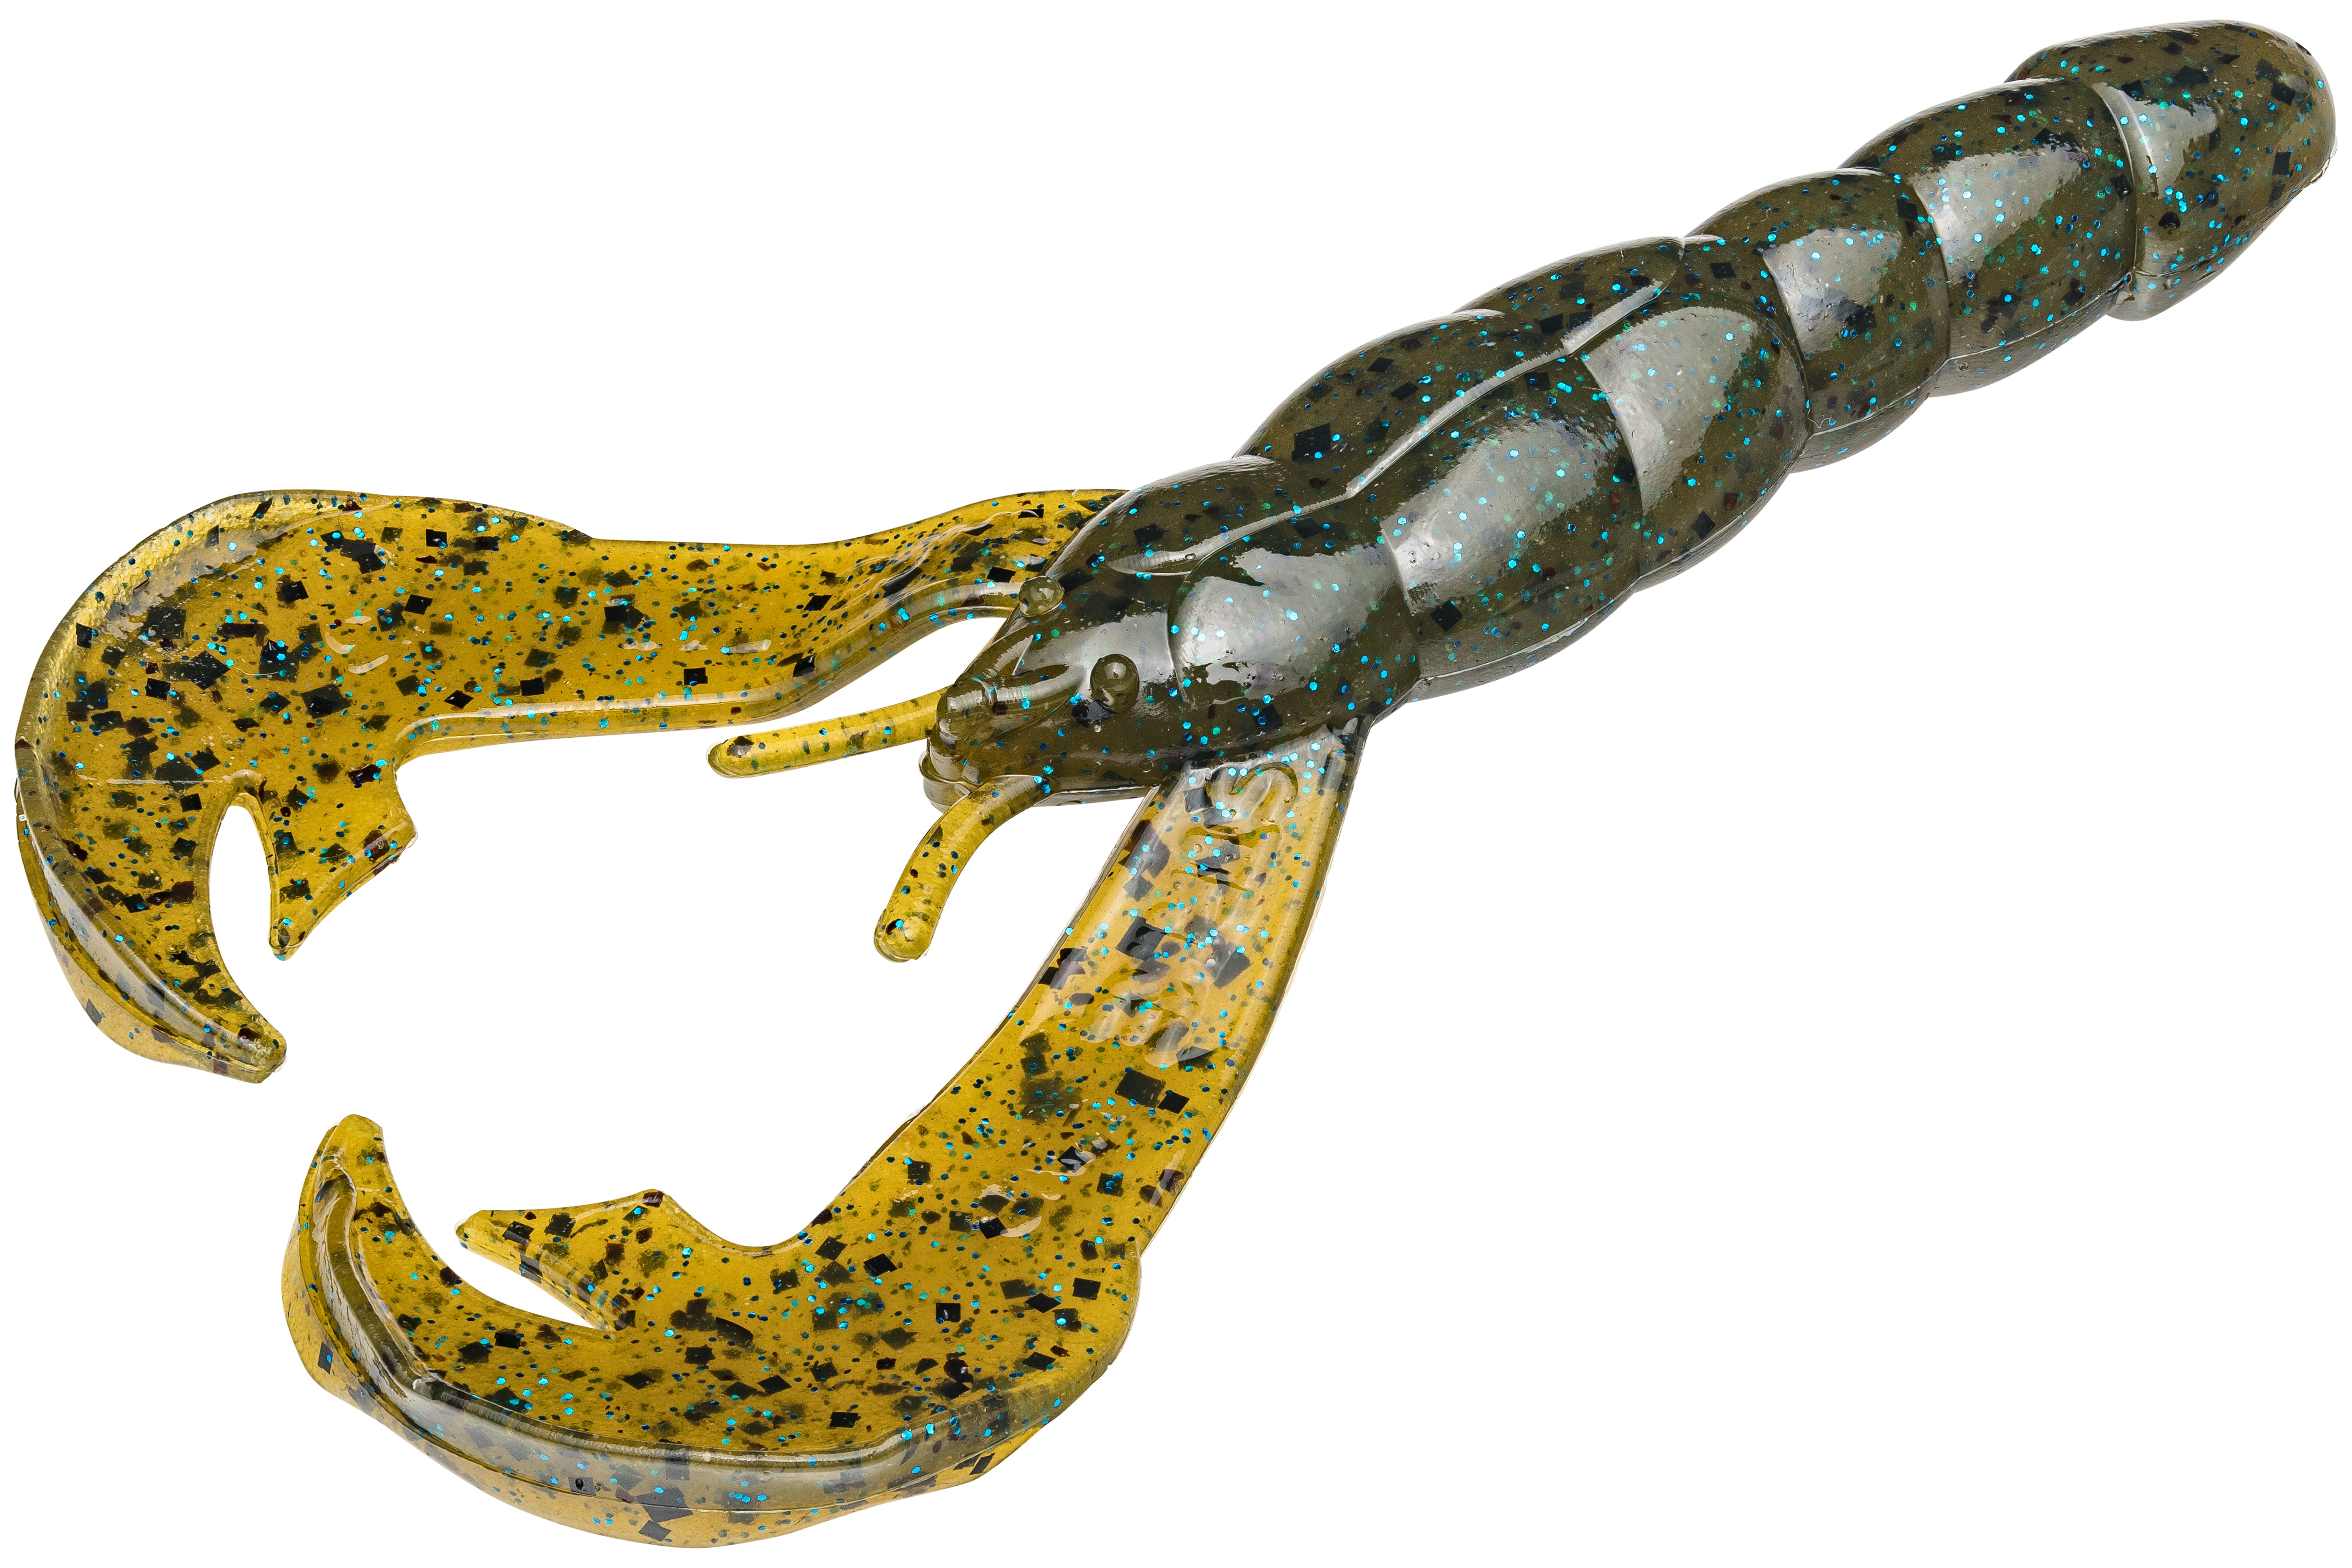 Strike King Rage Craw 4 inch Soft Plastic Craw 7 pack — Discount Tackle